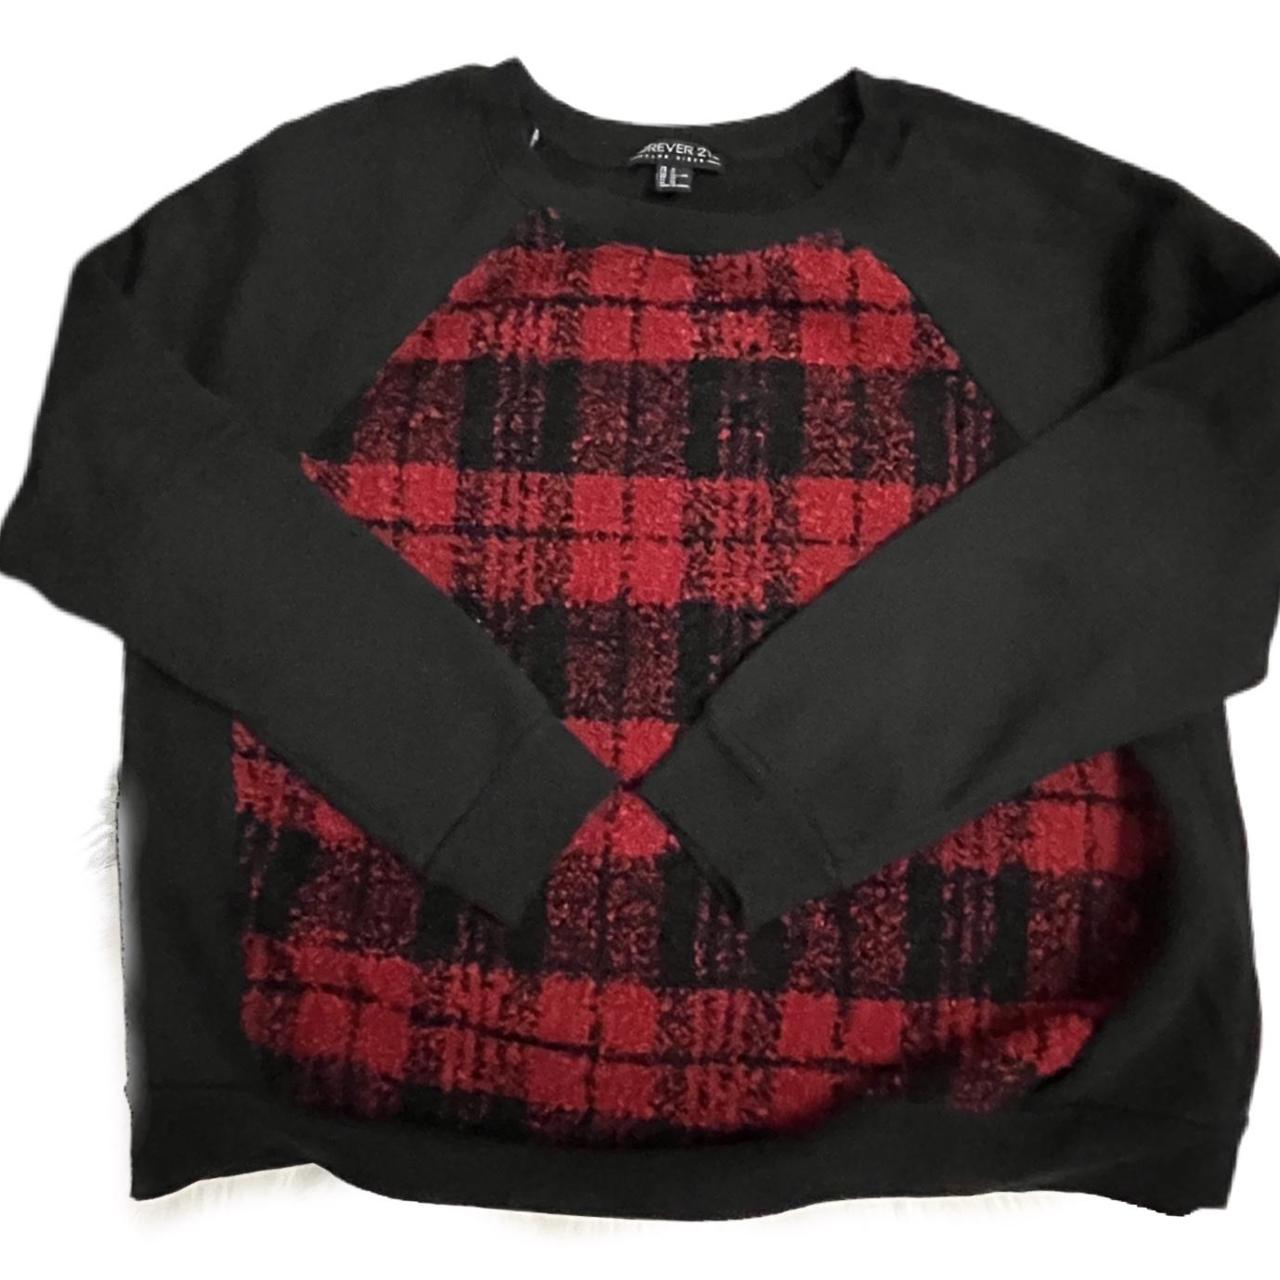 Forever 21 Women's Black and Red Sweatshirt